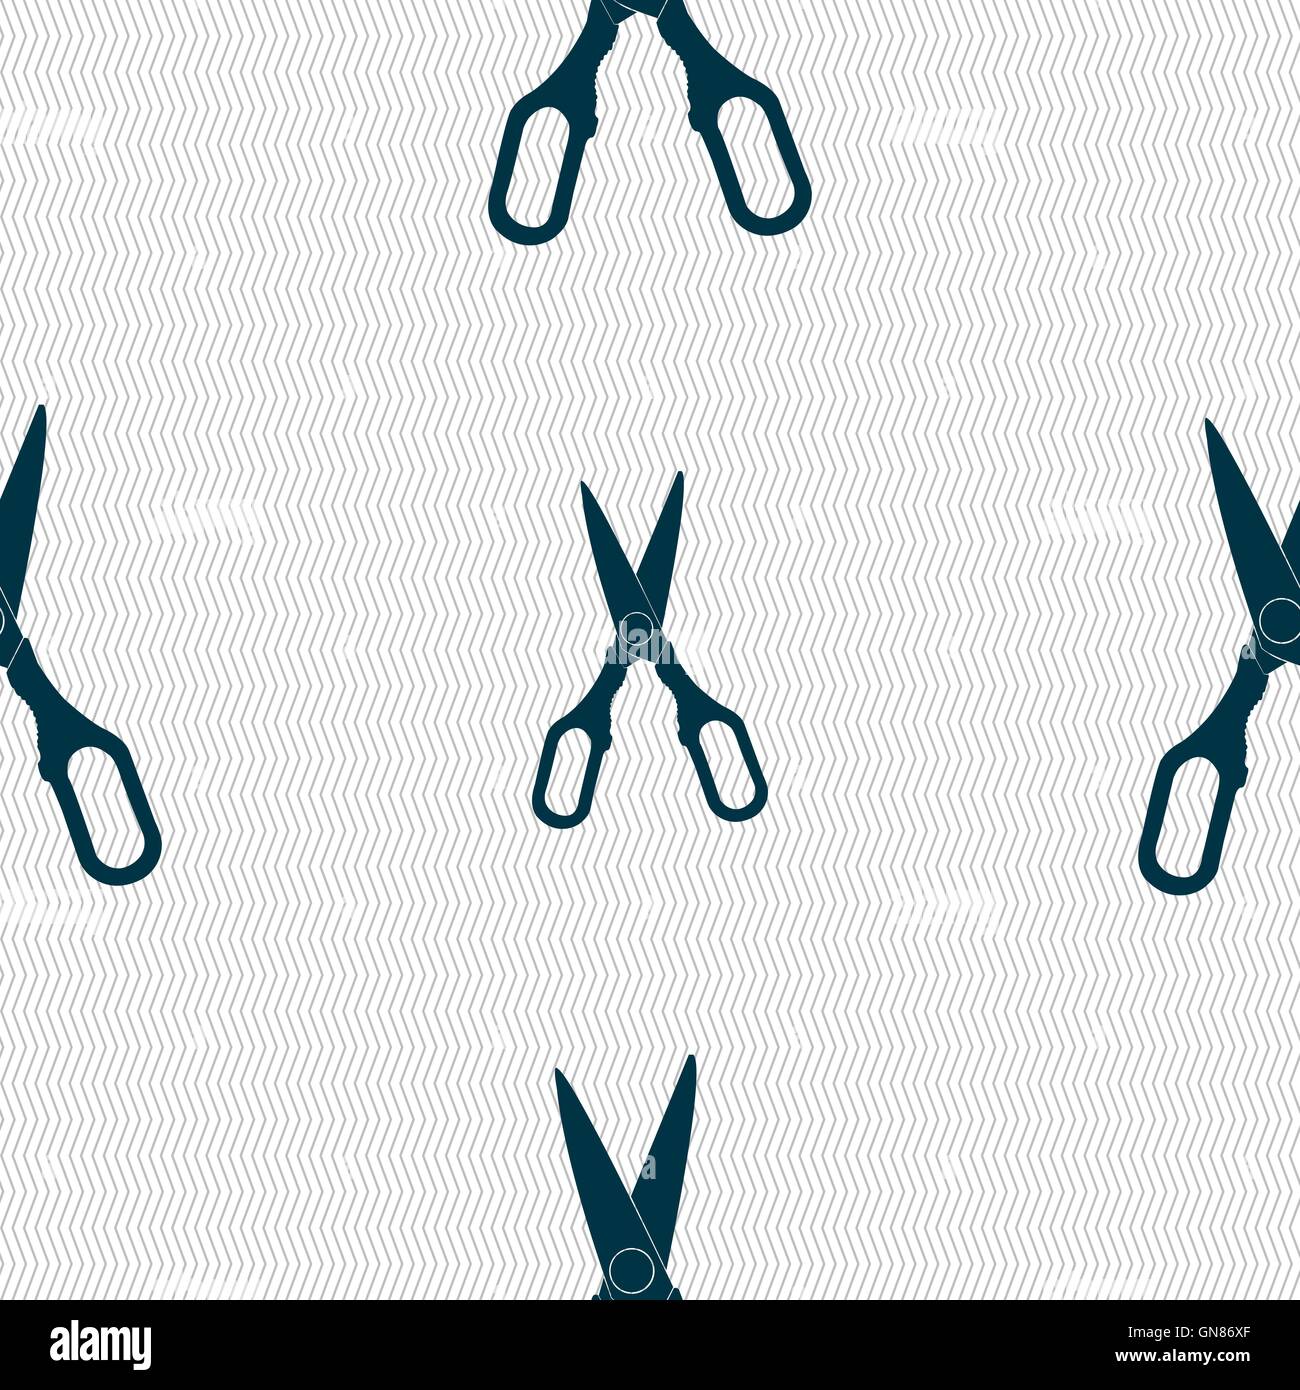 Scissors icon sign. Seamless pattern with geometric texture. Vector Stock Vector